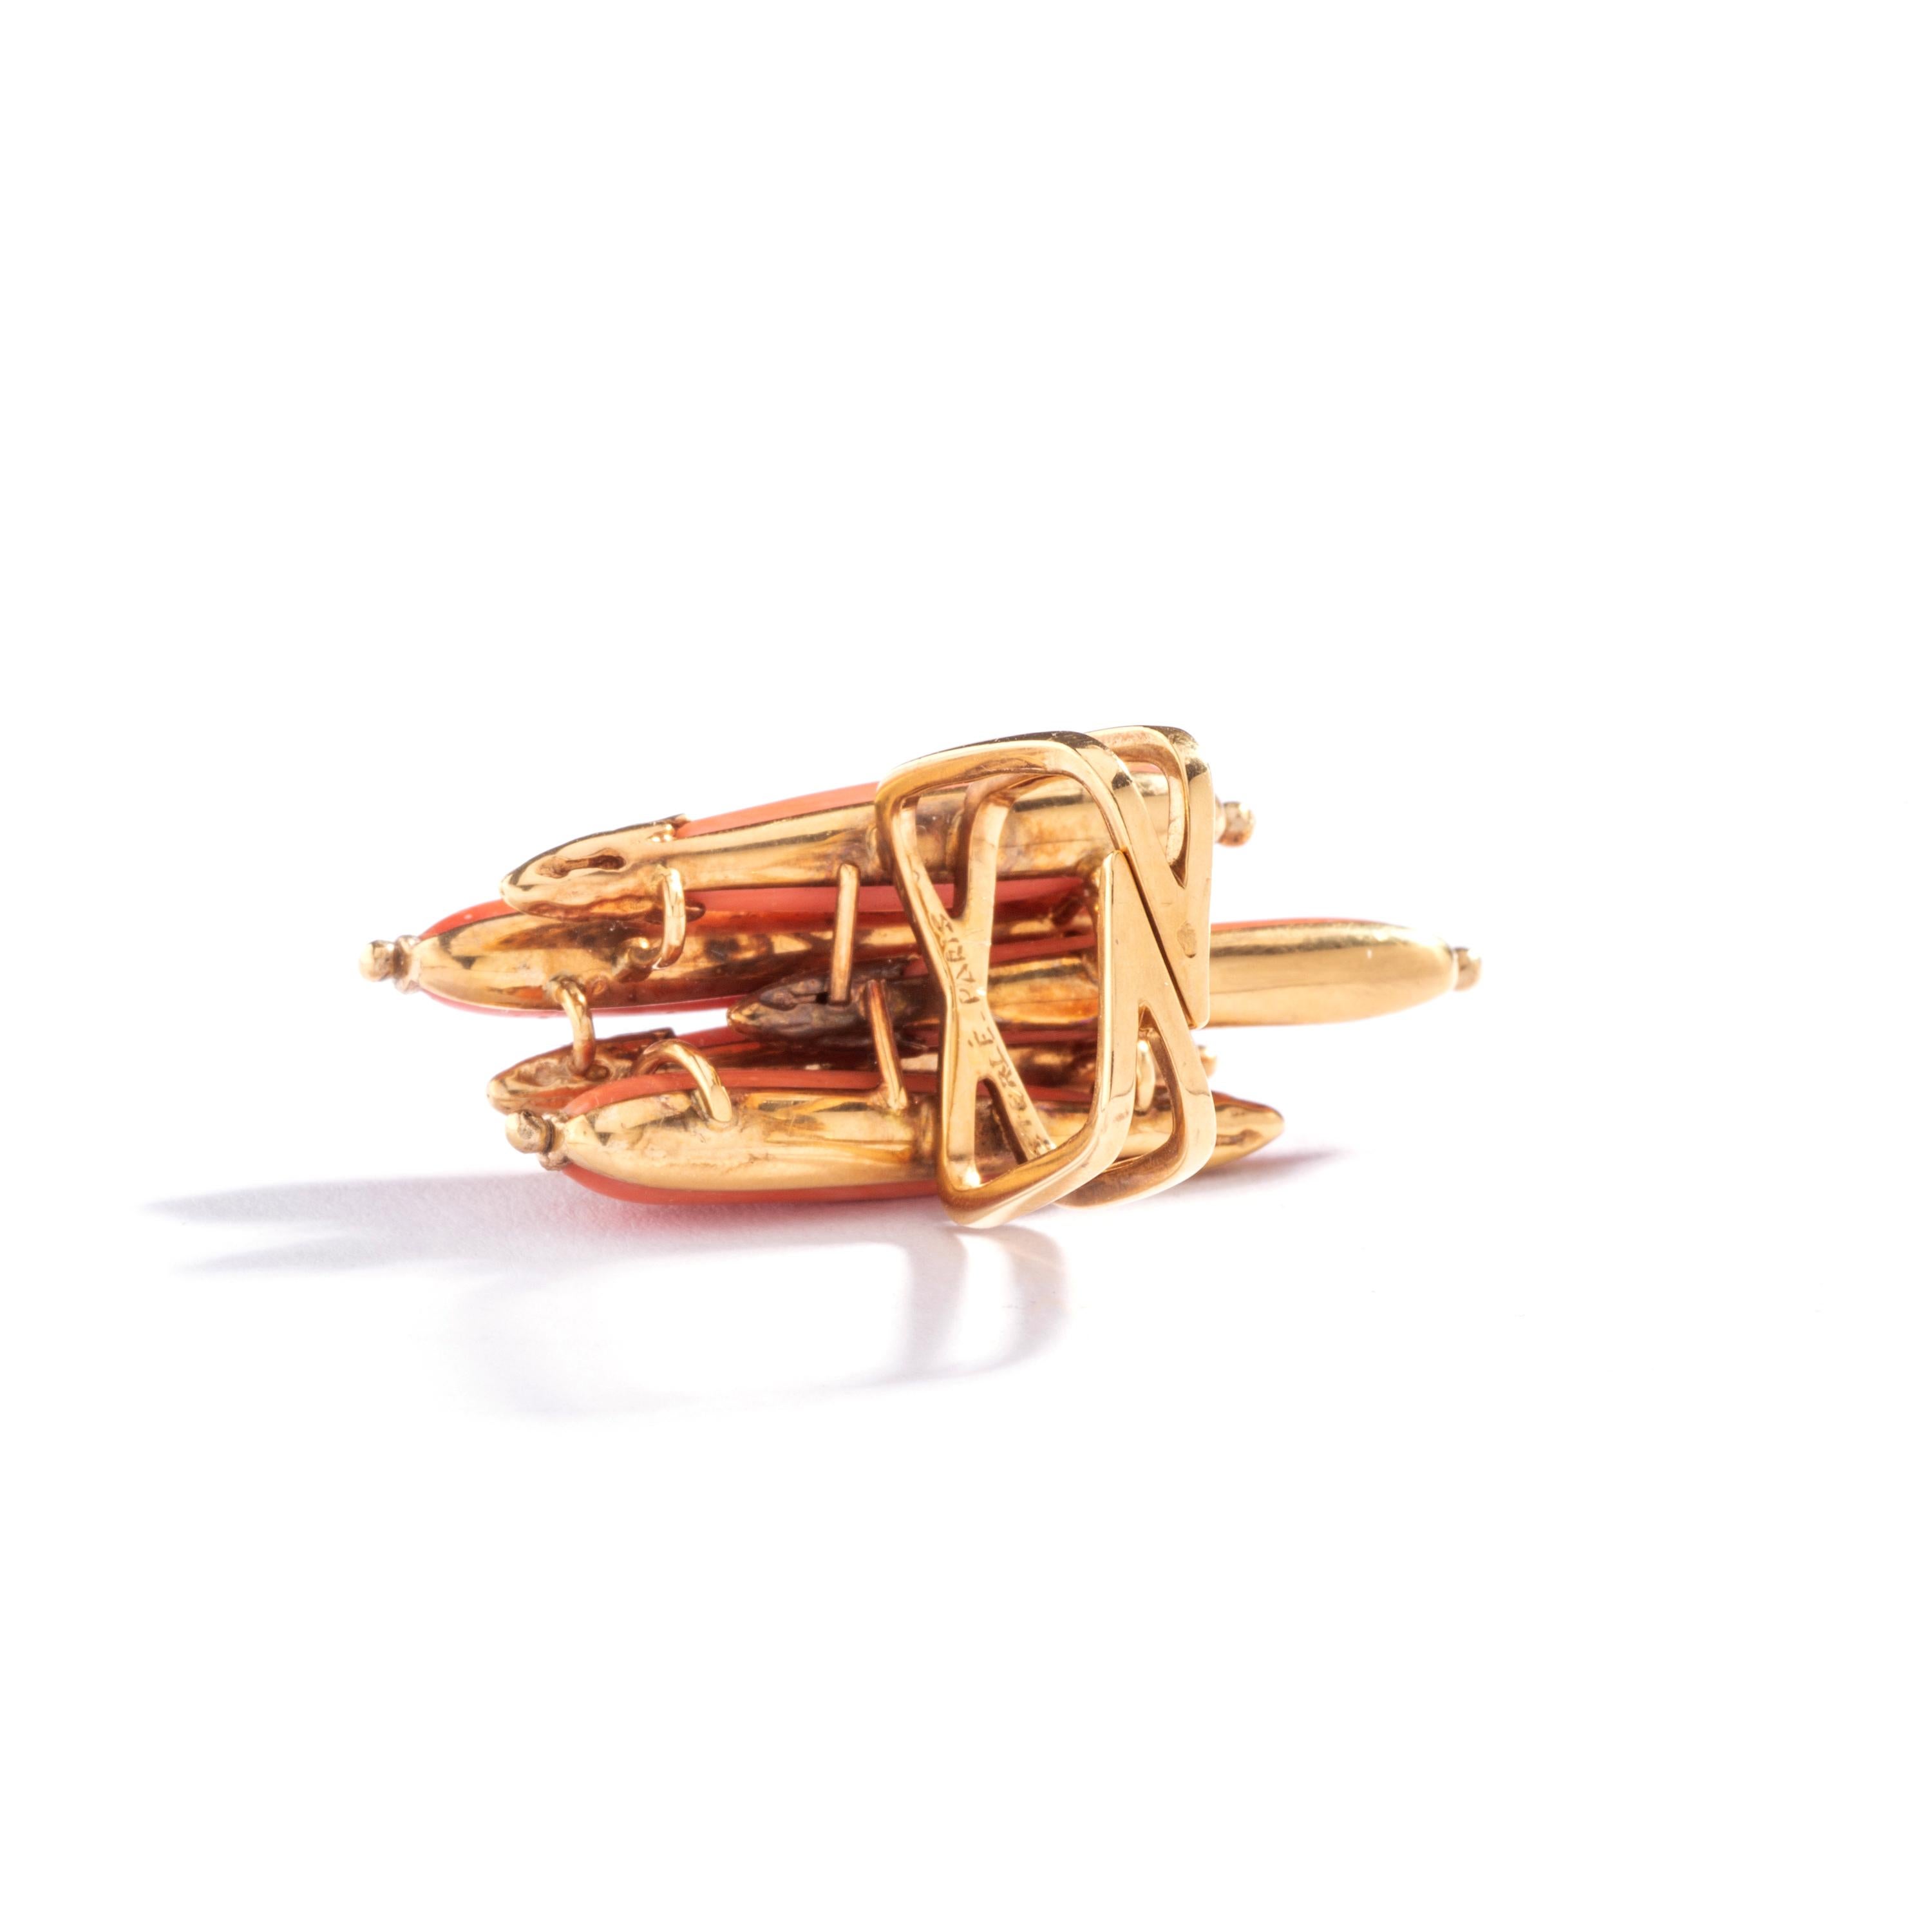 Aesthetic Movement Pierre Sterle Coral and Gold Ring, 1960s For Sale